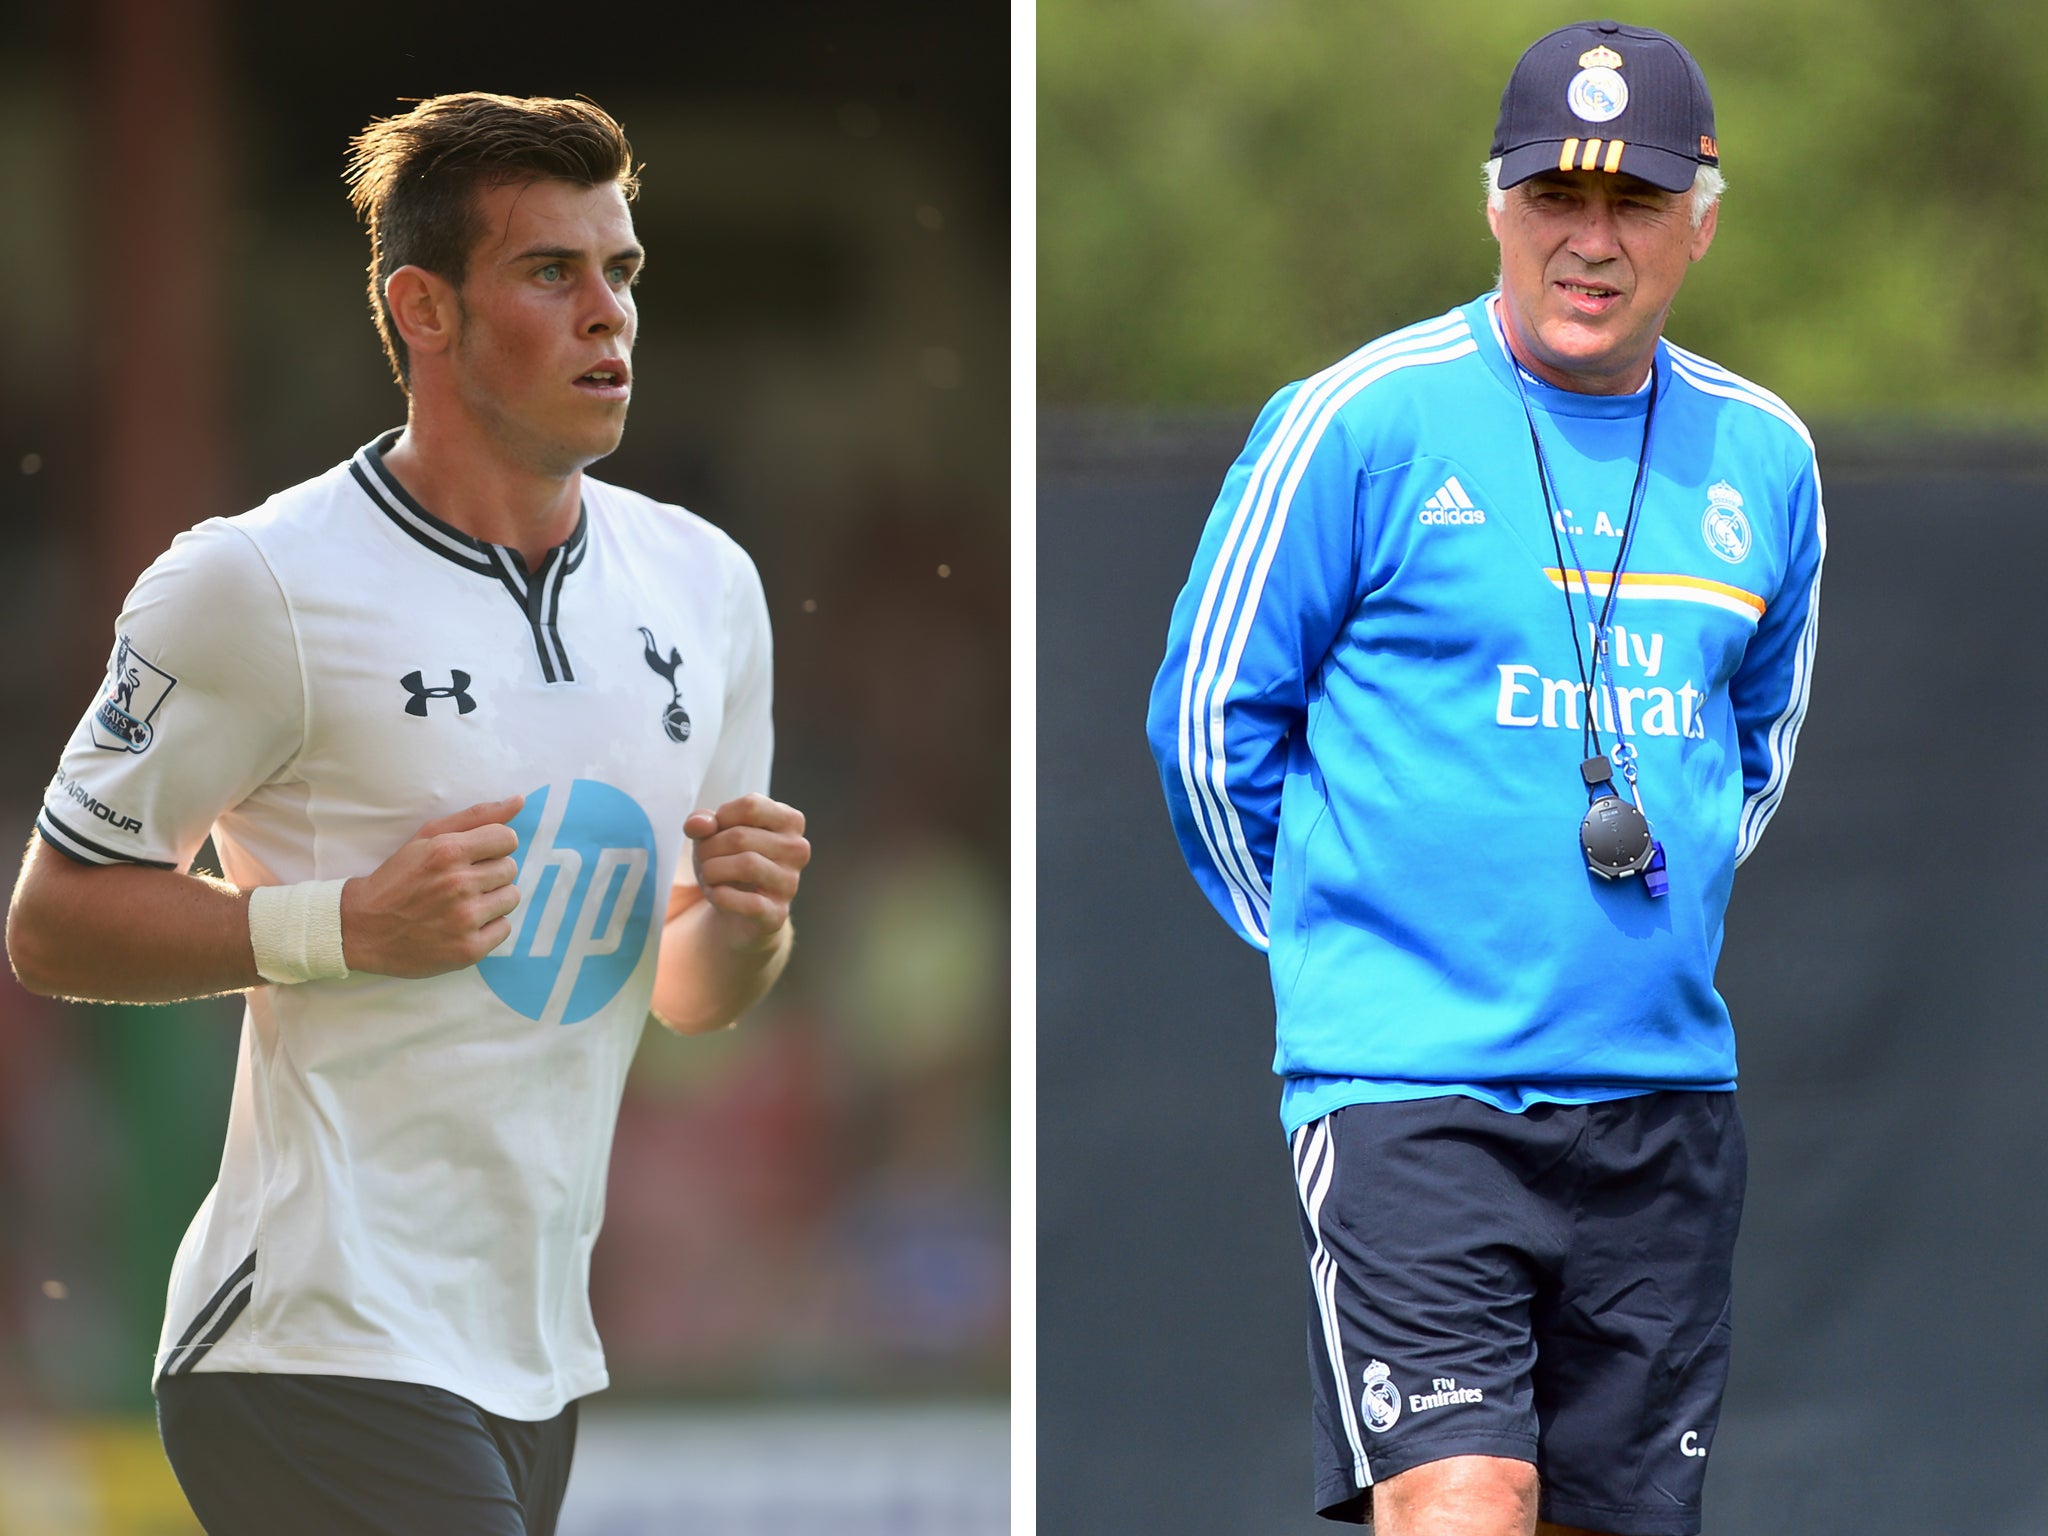 Carlo Ancelotti has been speaking over the proposed transfer of Tottenham's Gareth Bale to Real Madrid